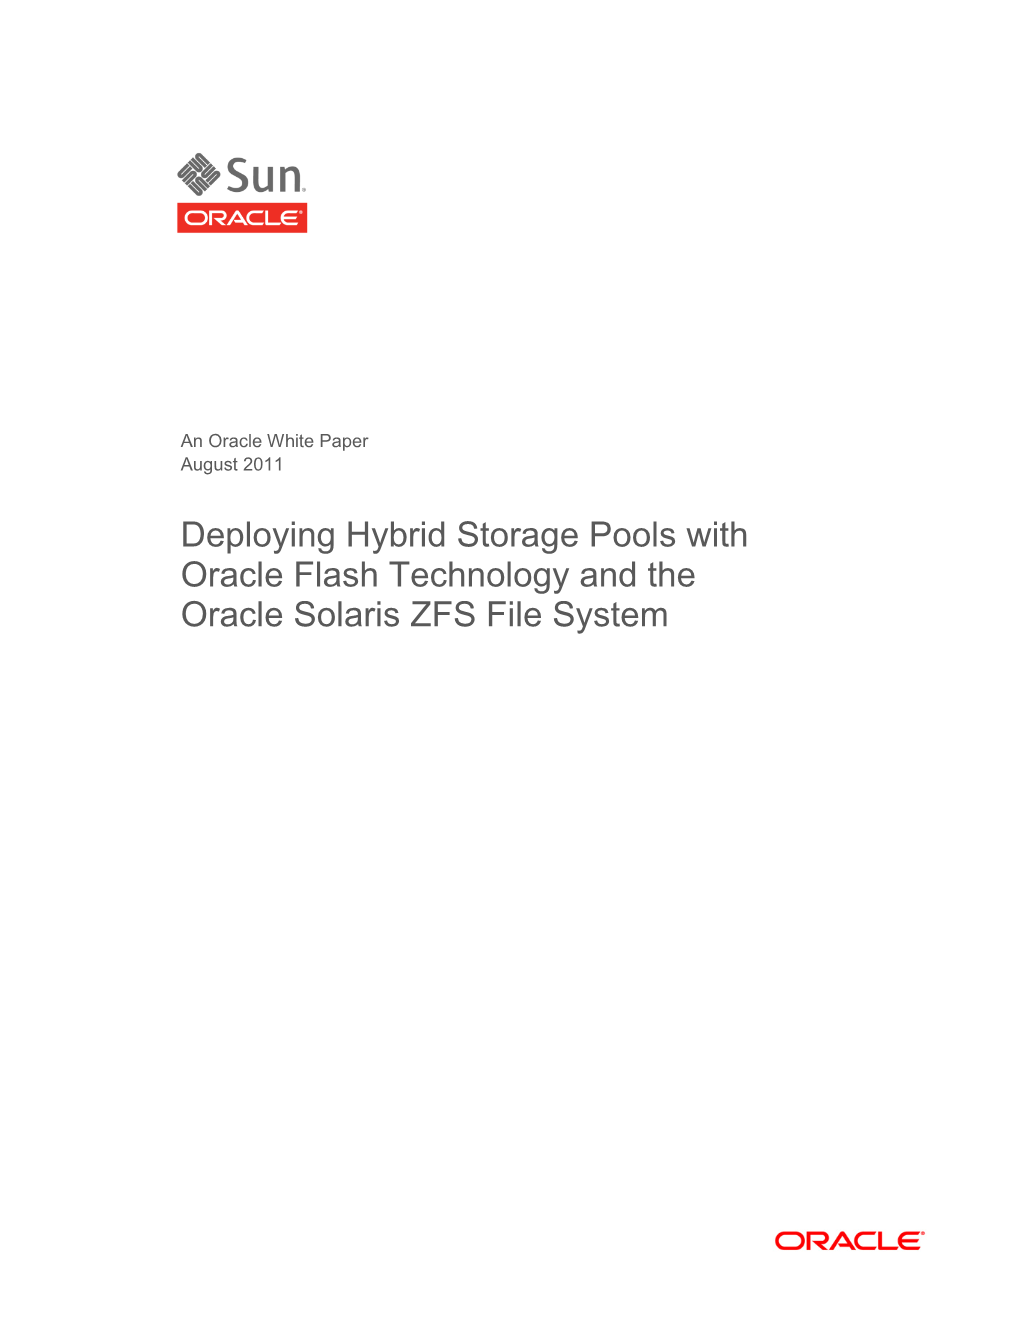 Deploying Hybrid Storage Pool with Oracle Flash Technology and The